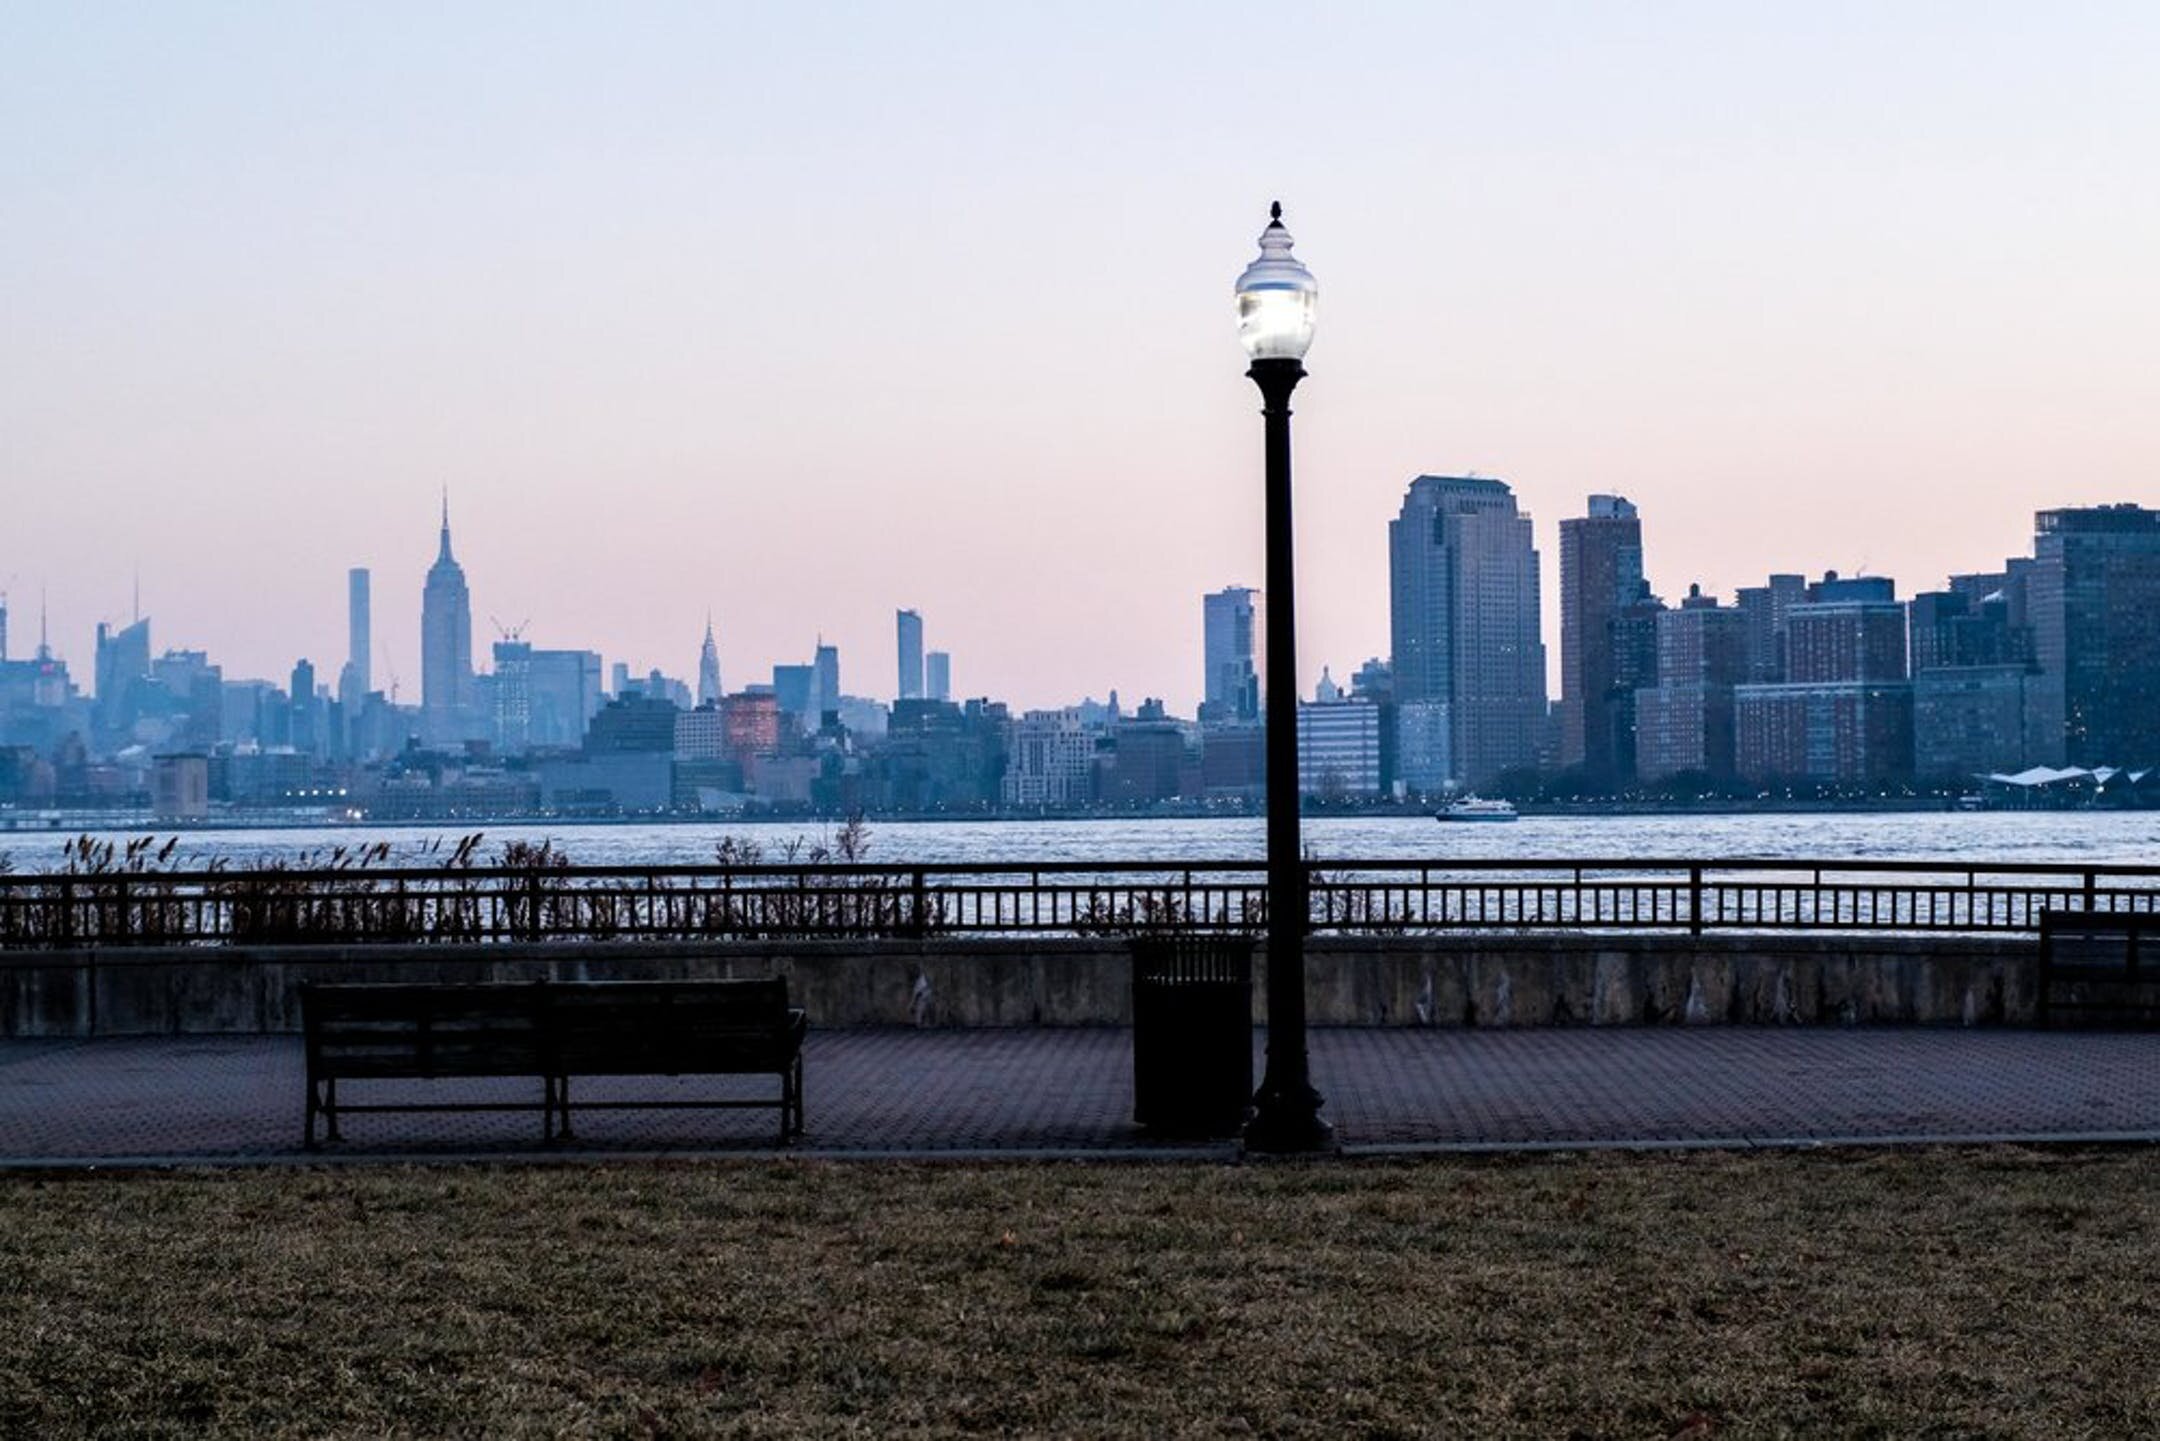 Statue of woman's head in Jersey City seen from Hudson River